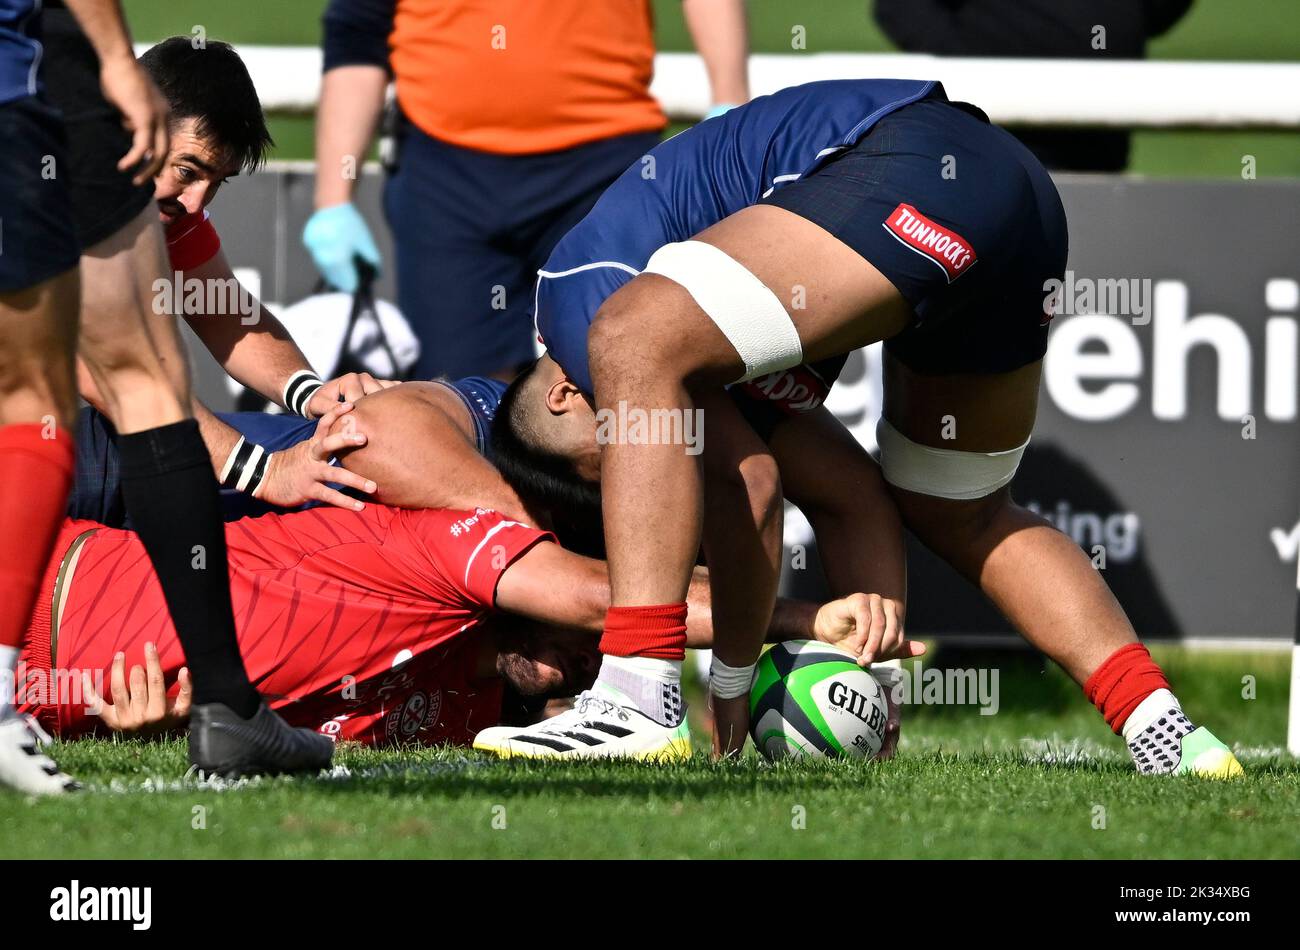 Richmond, United Kingdom. 24th Sep, 2022. Championship Rugby. London Scottish V Jersey Reds. The Richmond Athletic Ground. Richmond. Lewis Wynne (Jersey Reds, captain) stretches to score a try during the London Scottish V Jersey Reds championship rugby match. Credit: Sport In Pictures/Alamy Live News Stock Photo